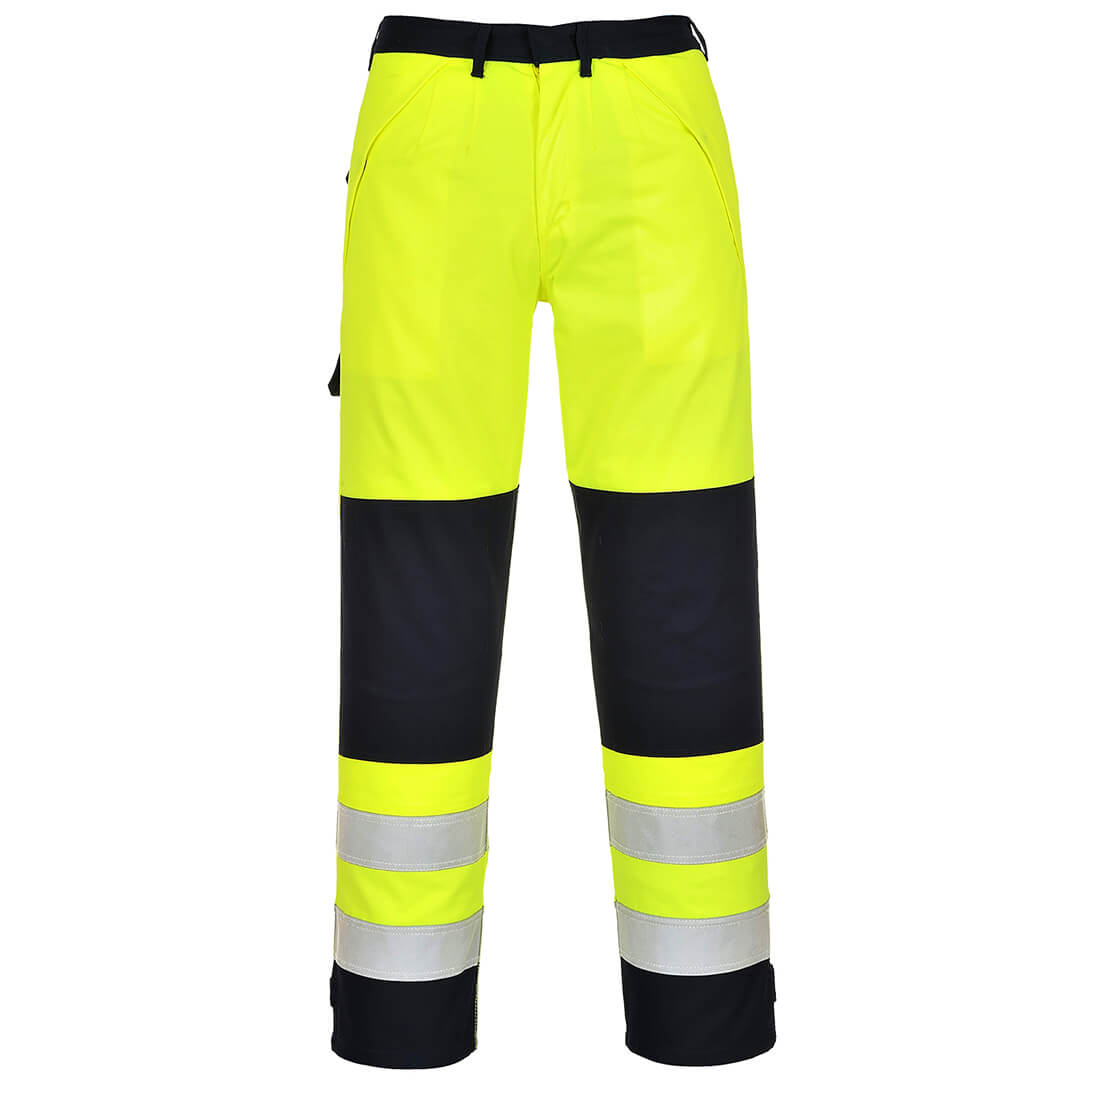 Photo of Biz Flame Hi Vis Multi-norm Flame Resistant Trousers Yellow / Navy L